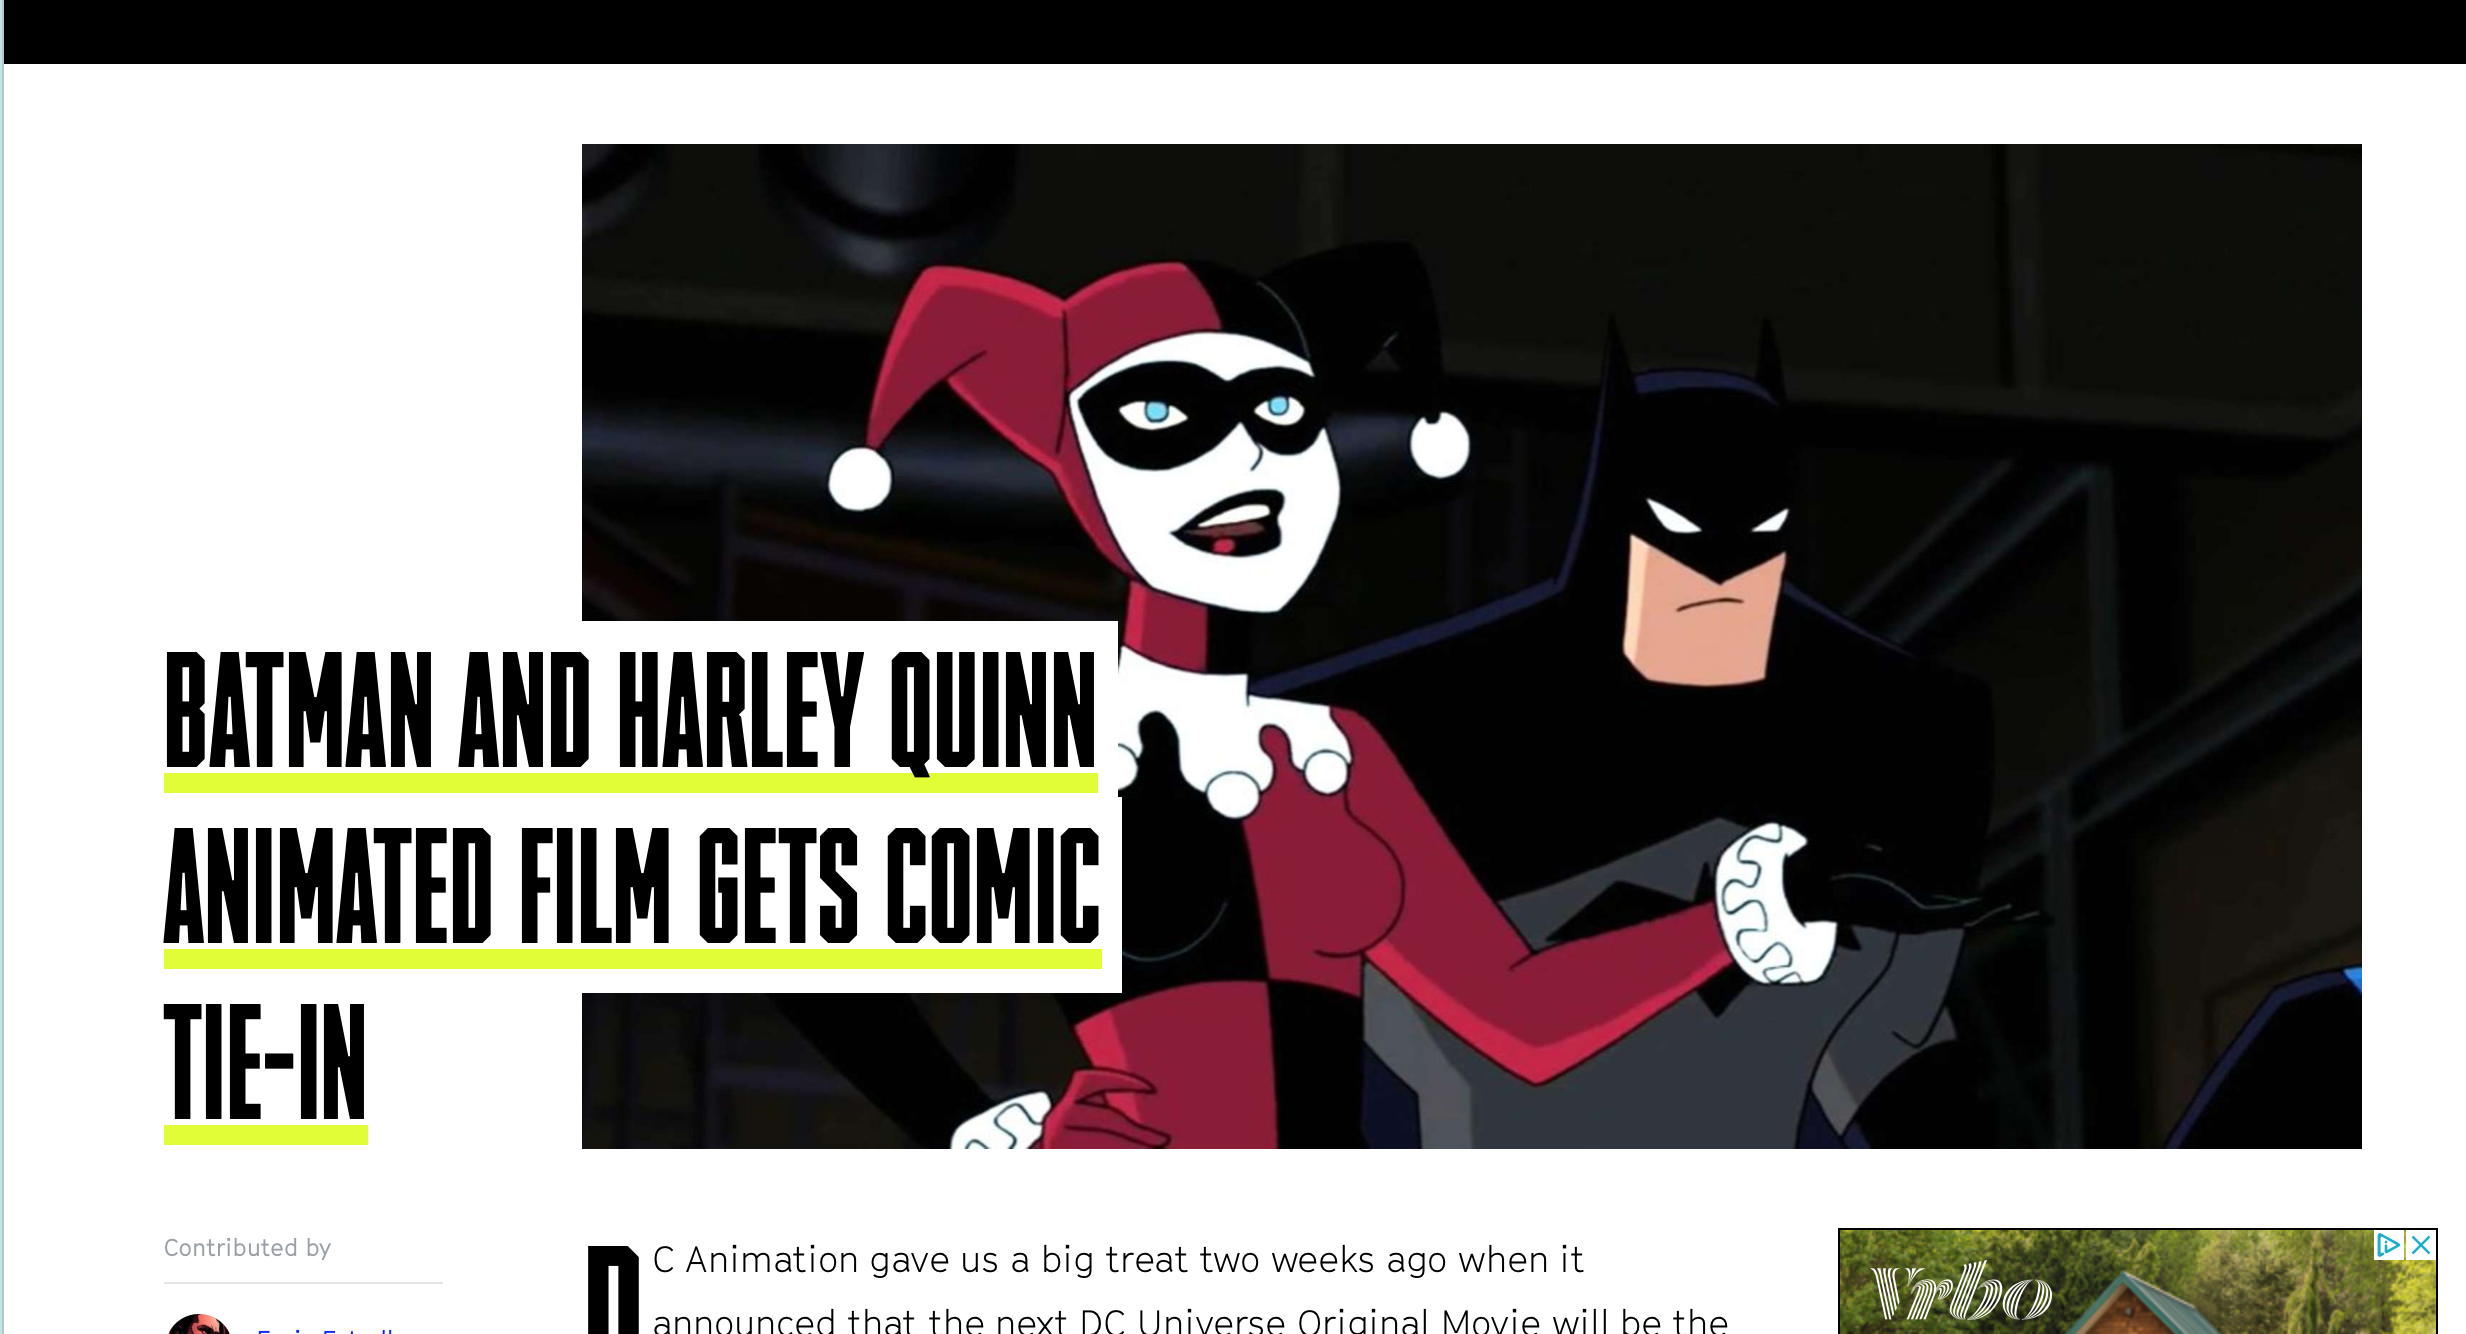 SYFY: BATMAN AND HARLEY QUINN ANIMATED FILM GETS COMIC TIE-IN